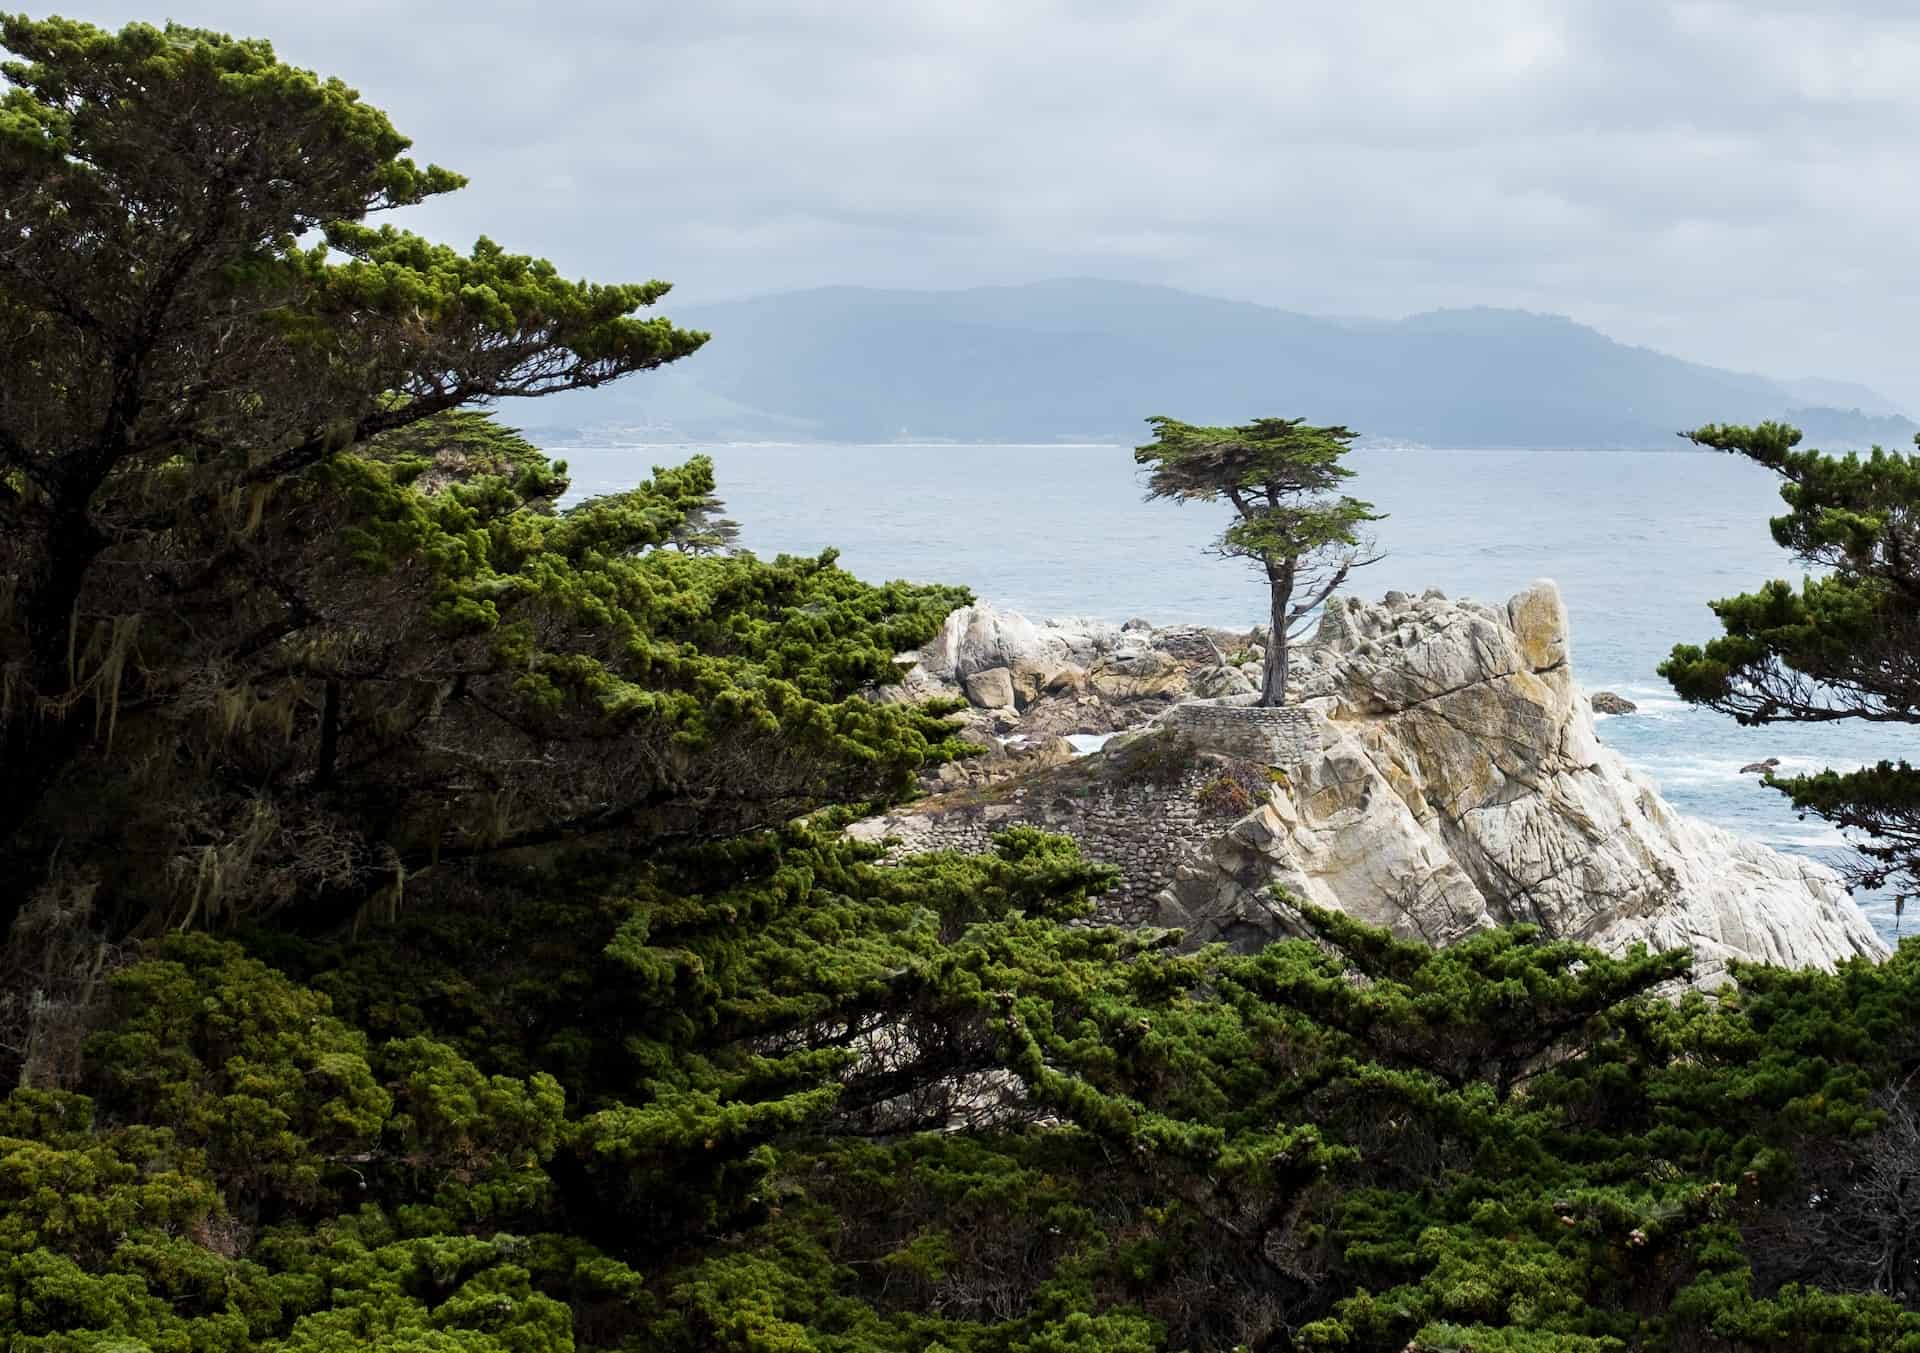 Best things to do in Monterey California - Chris Christensen - Iconic Lone Cypress along 17-Mile Drive by Ryan Parker on Unsplash